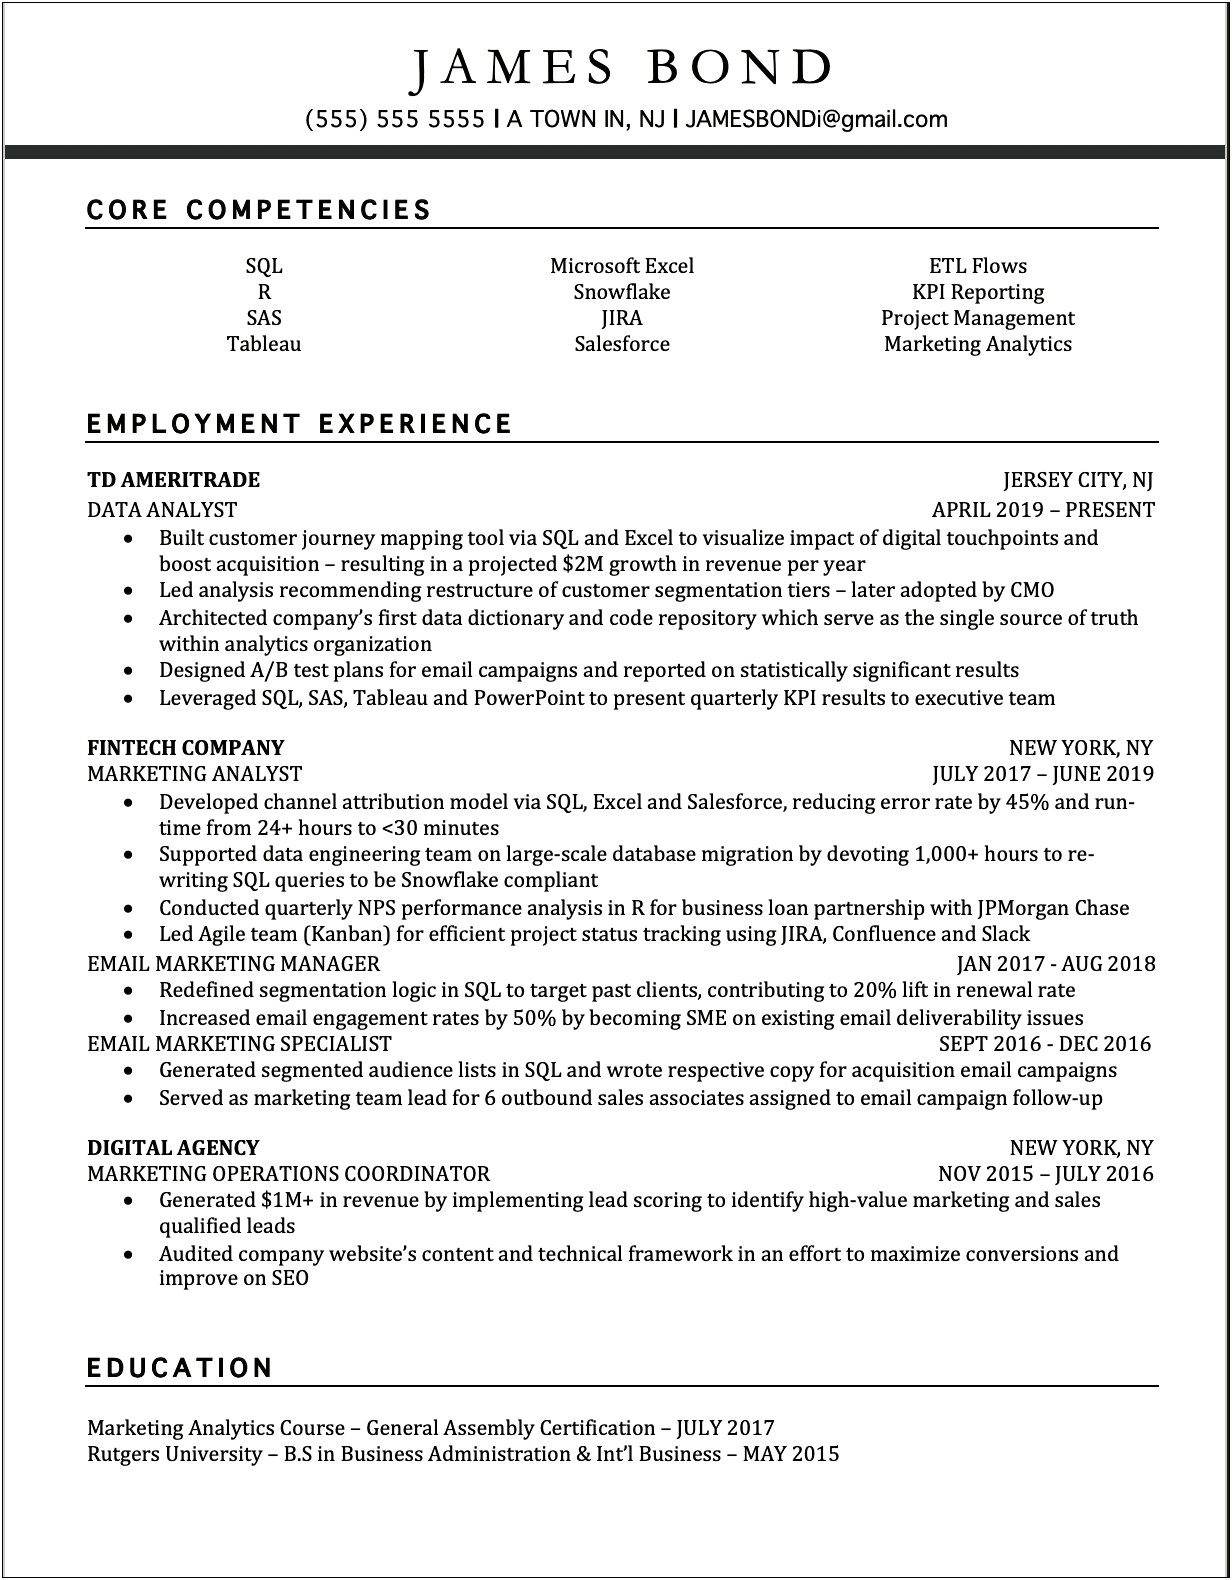 Resume With Multiple Jobs At One Employer